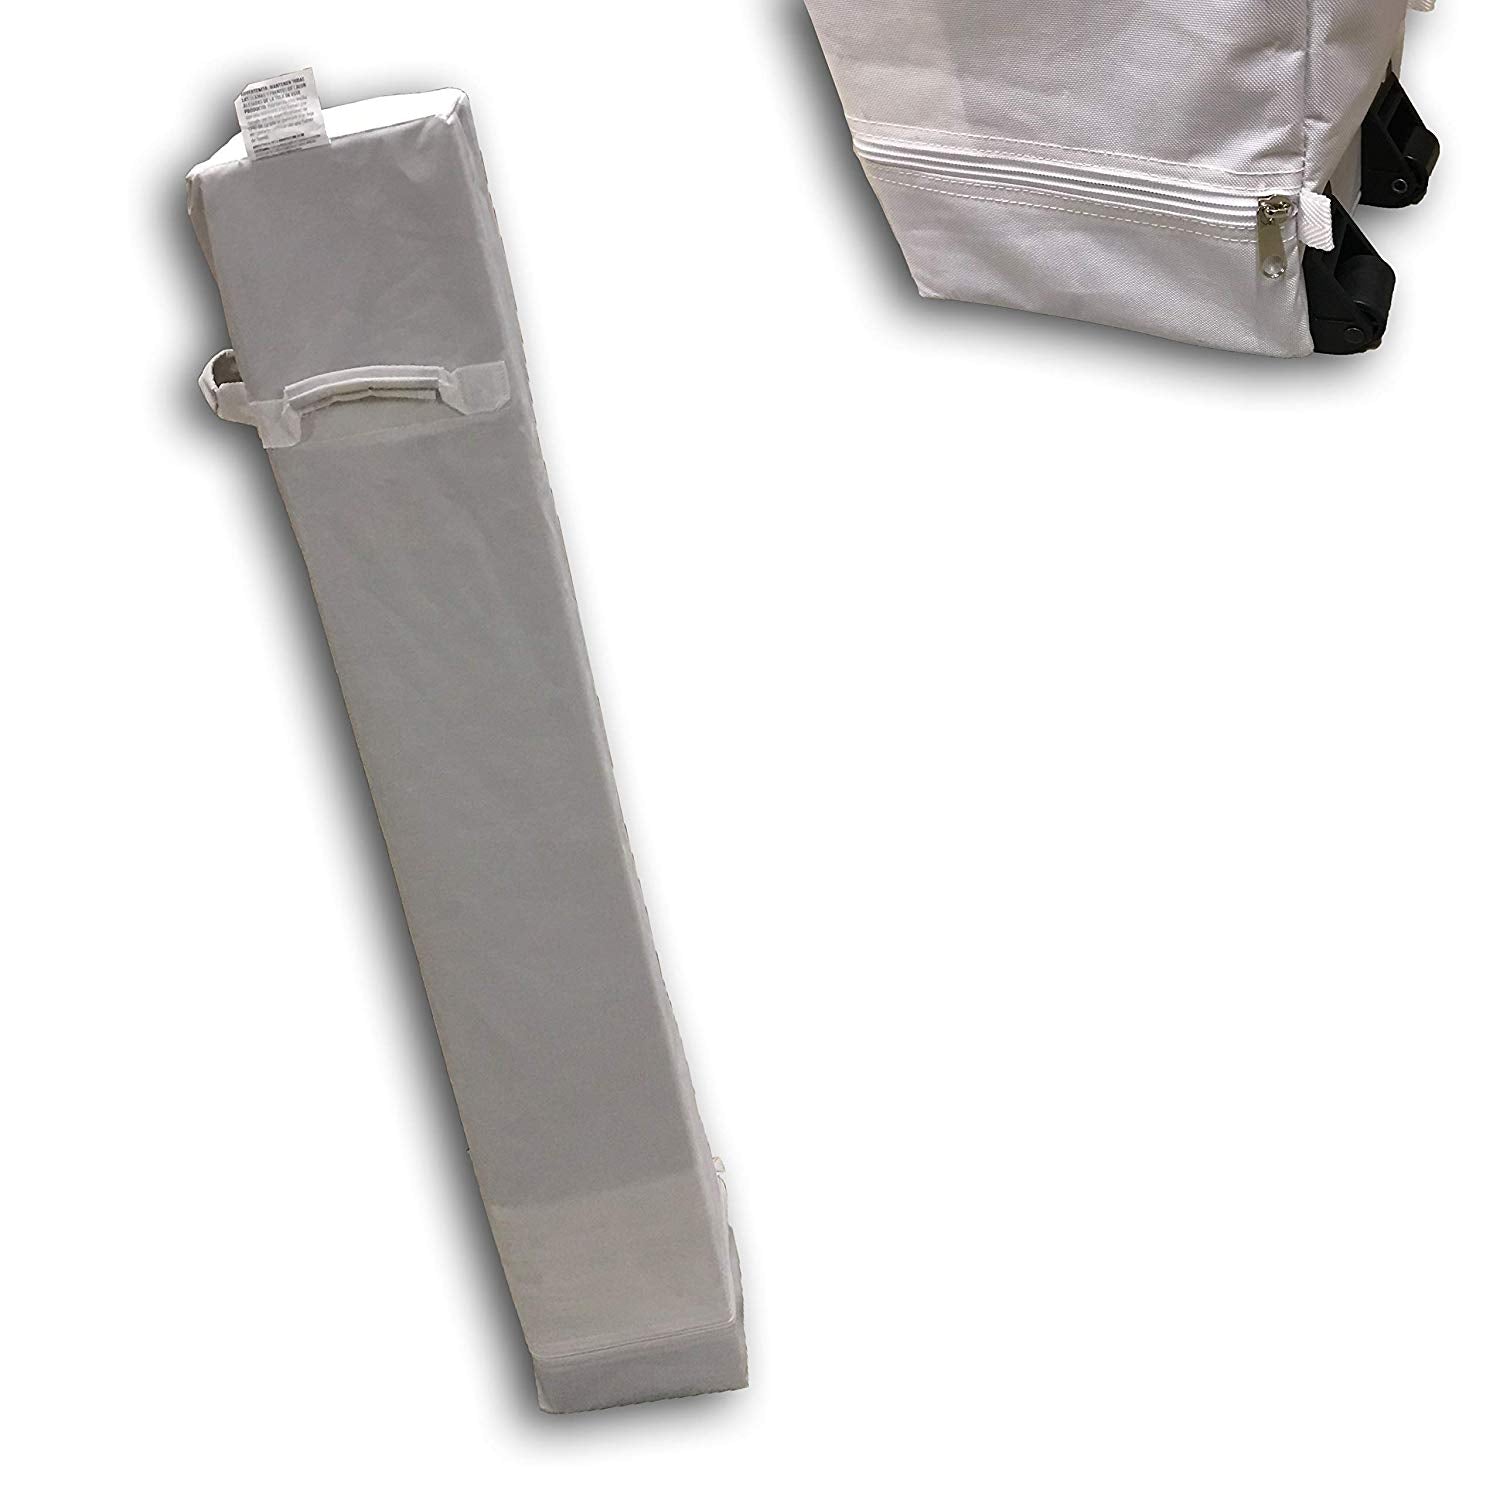 This photo displays a 46-inch Wheeled Carry Bag designed for the Ozark Trail 10' x 10' Canopy Gazebo. This bag serves as a replacement Canopy Part and features a clean white color. It's an essential accessory for transporting and storing your canopy, offering convenience and practicality for various outdoor events and gatherings.